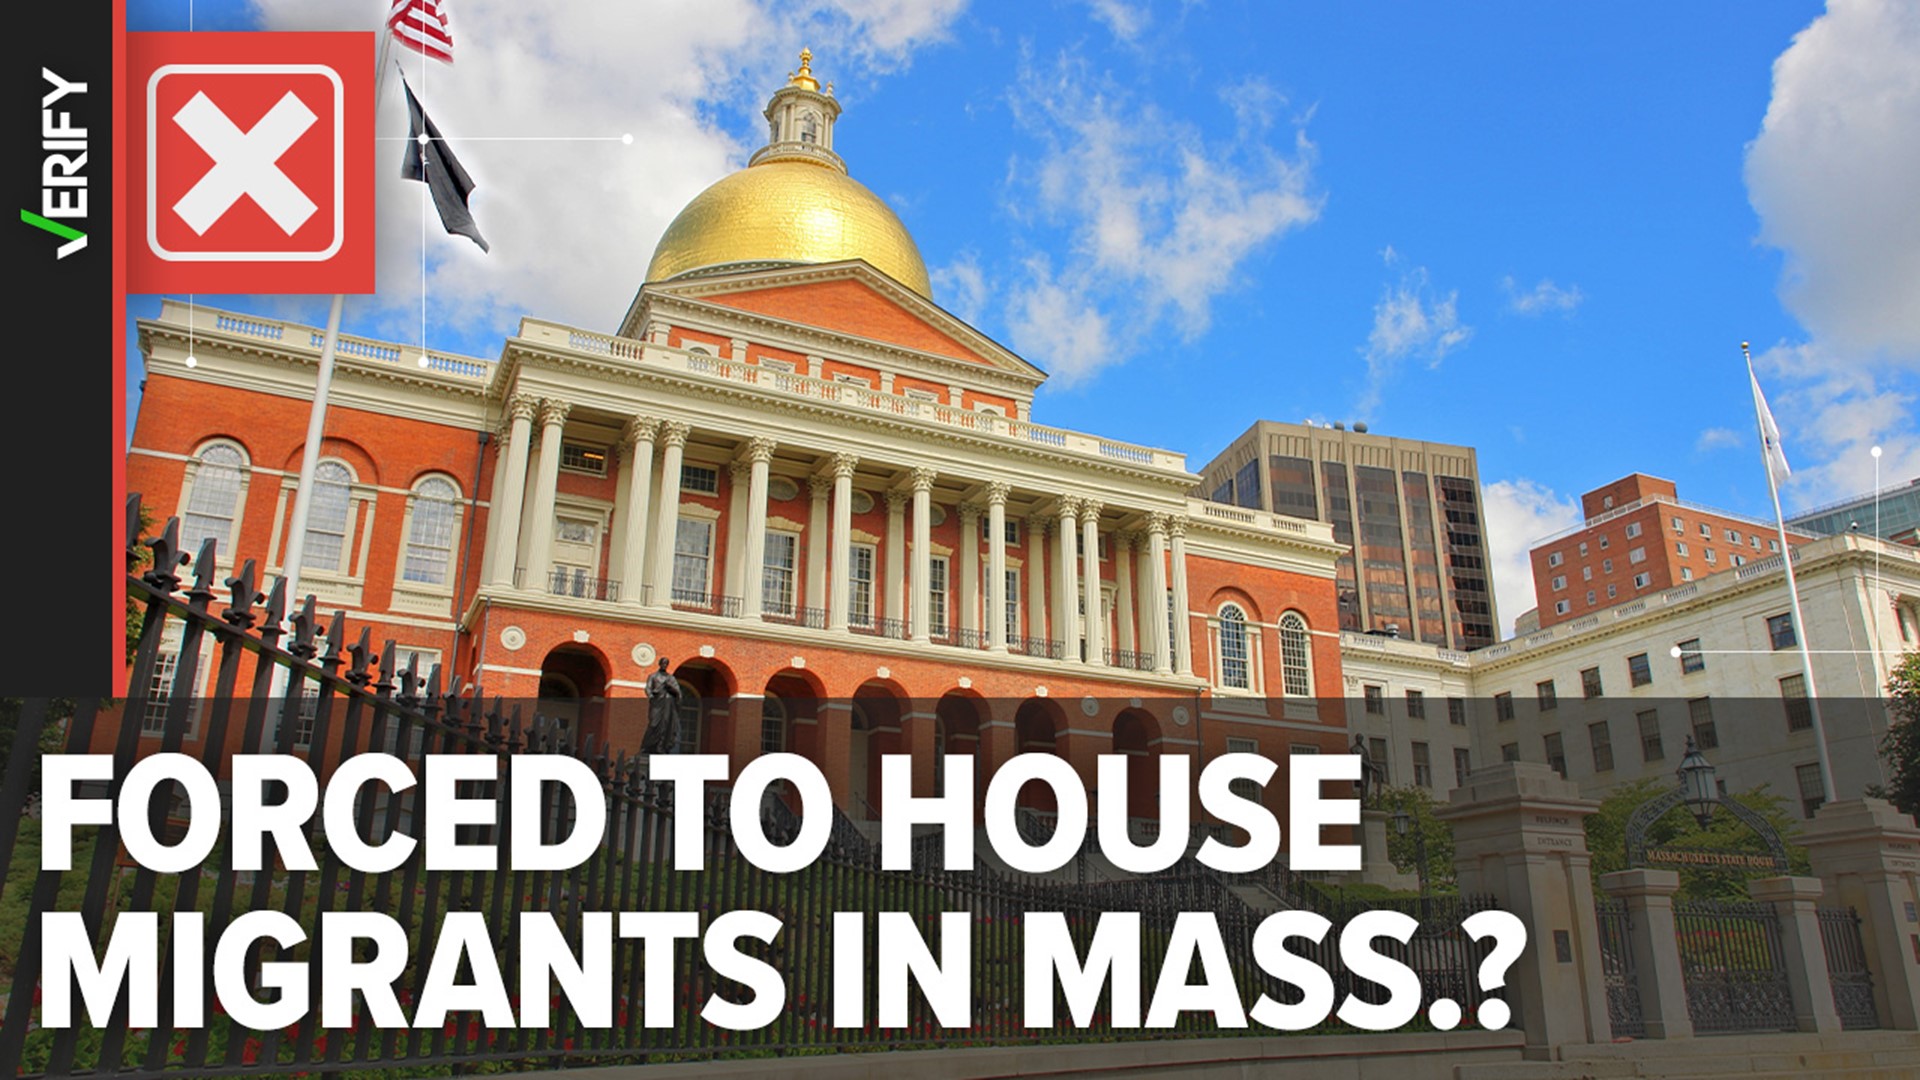 A viral post implies that people in Massachusetts will soon be forced to house migrants. That's false.